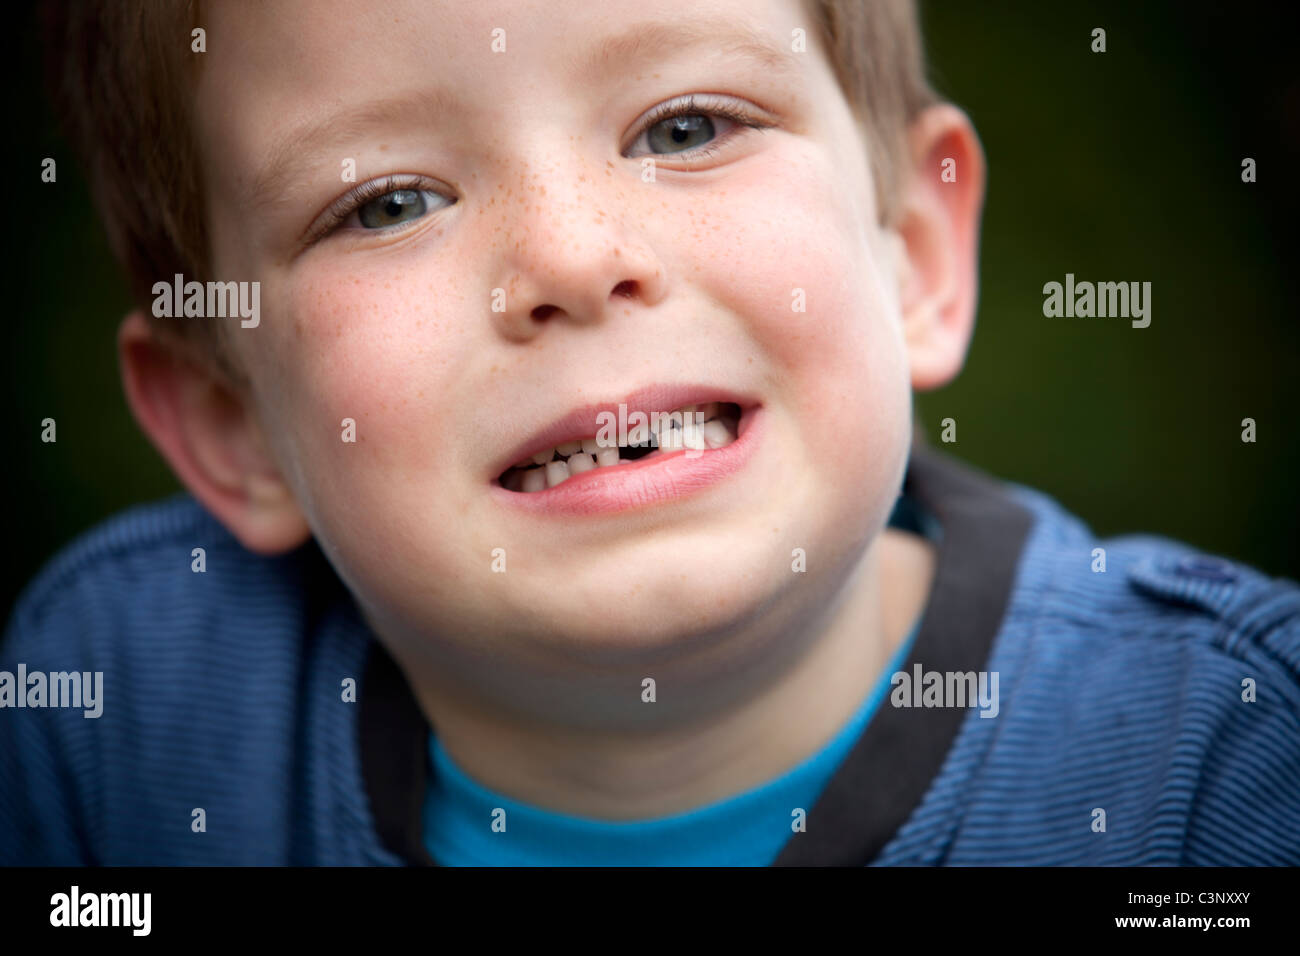 A young boy shows off his missing front tooth. Stock Photo